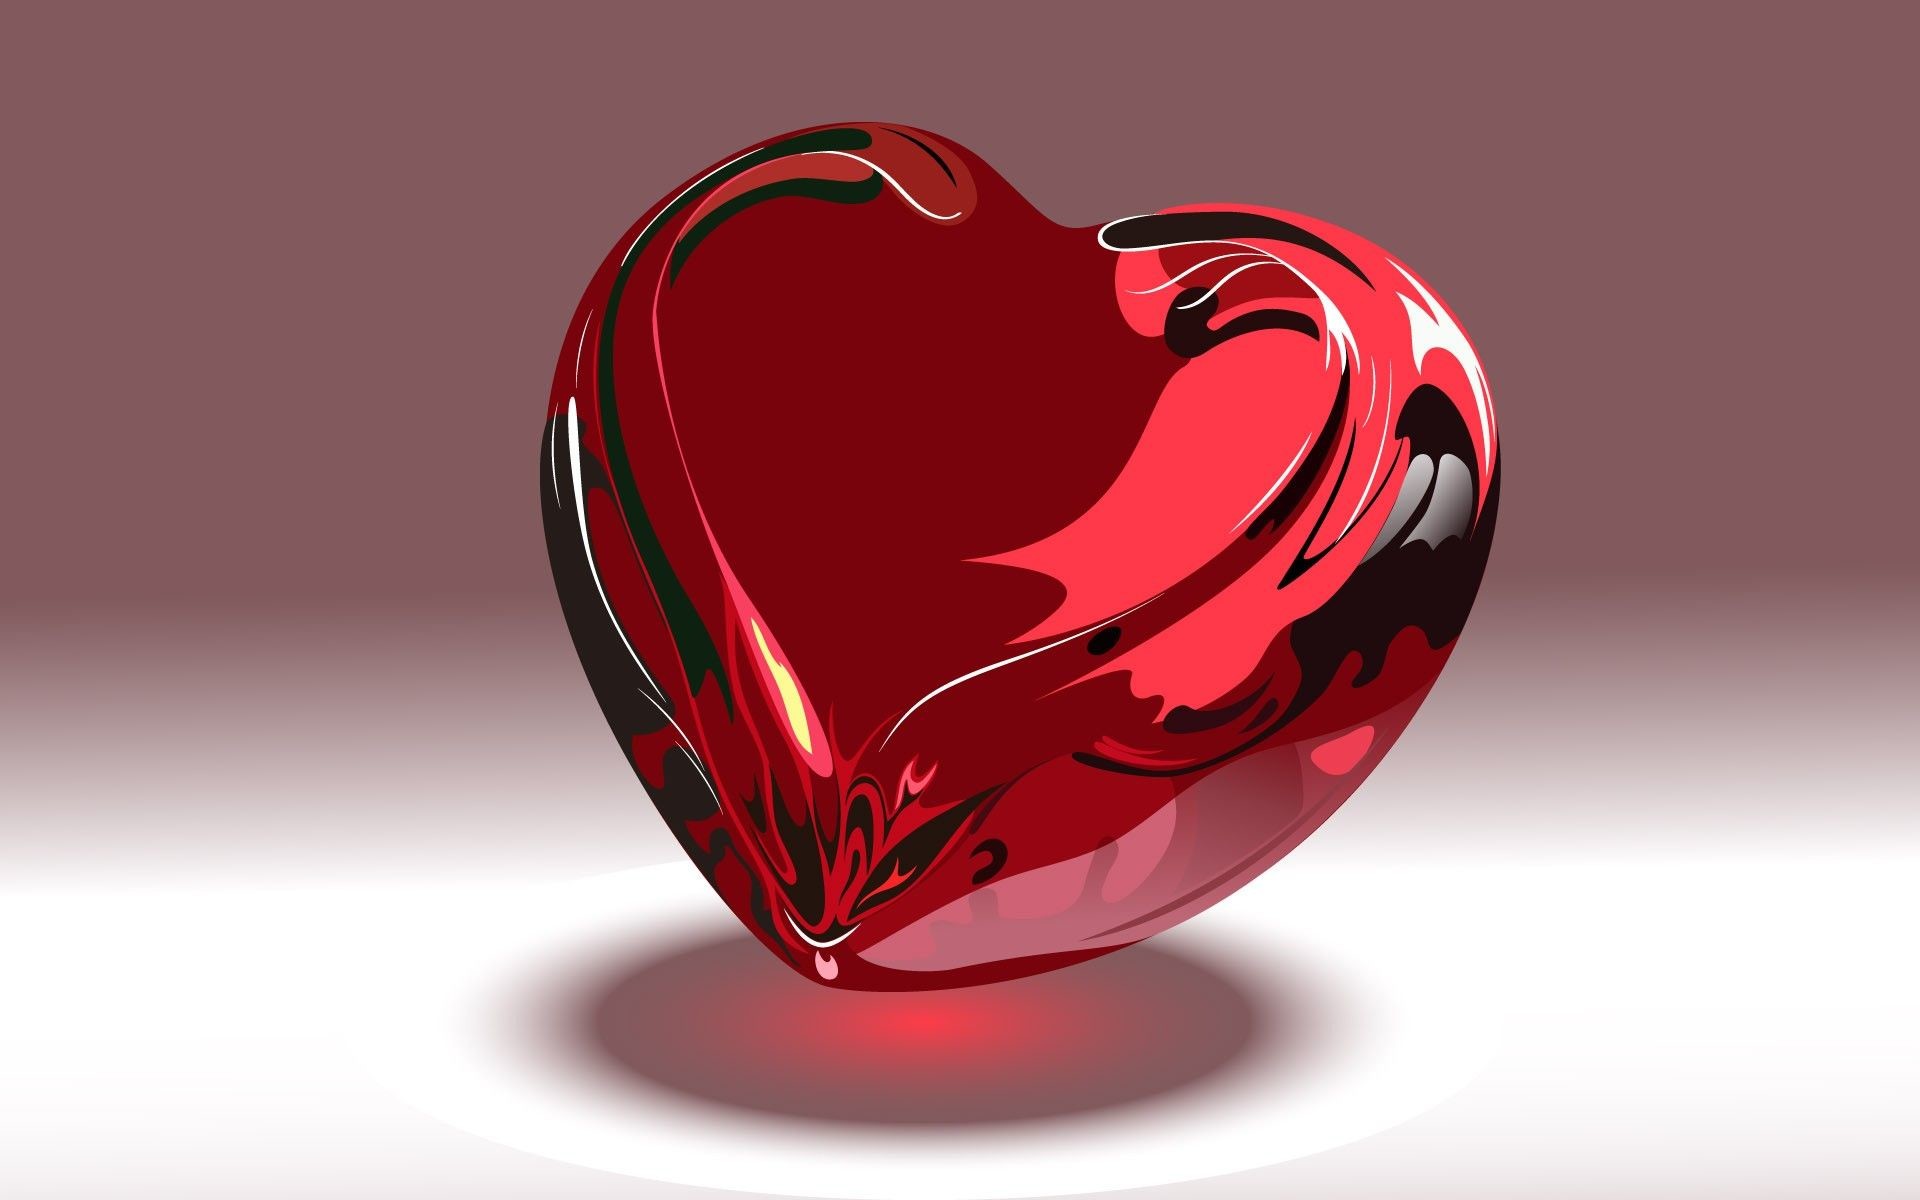 1920x1200 Image for Hd Wallpaper 3d Love Heart 150778 Image